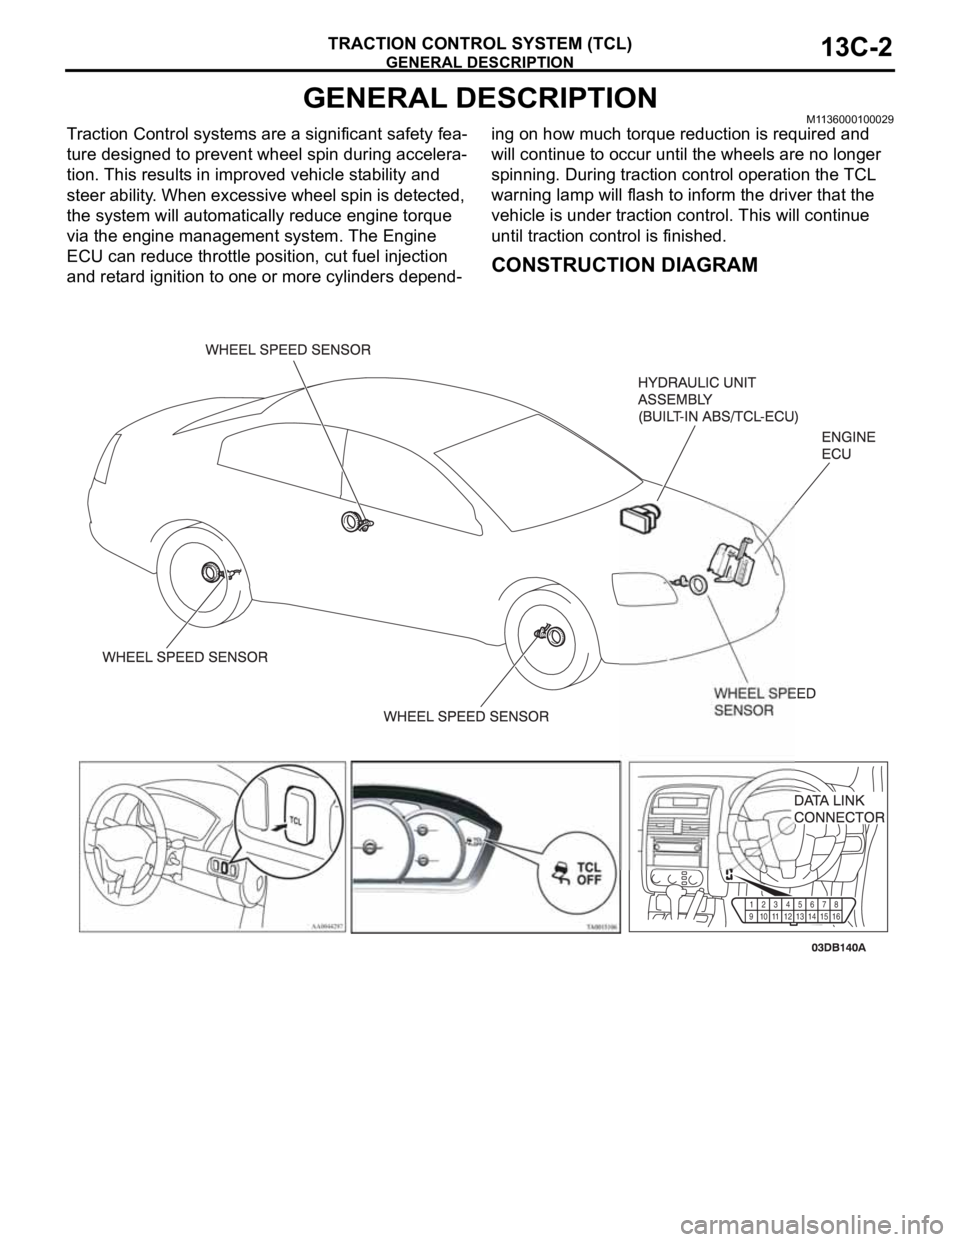 MITSUBISHI 380 2005  Workshop Manual GENERAL DESCRIPTION
TRACTION CONTROL SYSTEM (TCL)13C-2
GENERAL DESCRIPTIONM1136000100029
Traction Control systems are a significant safety fea-
ture designed to prevent wheel spin during accelera-
tio